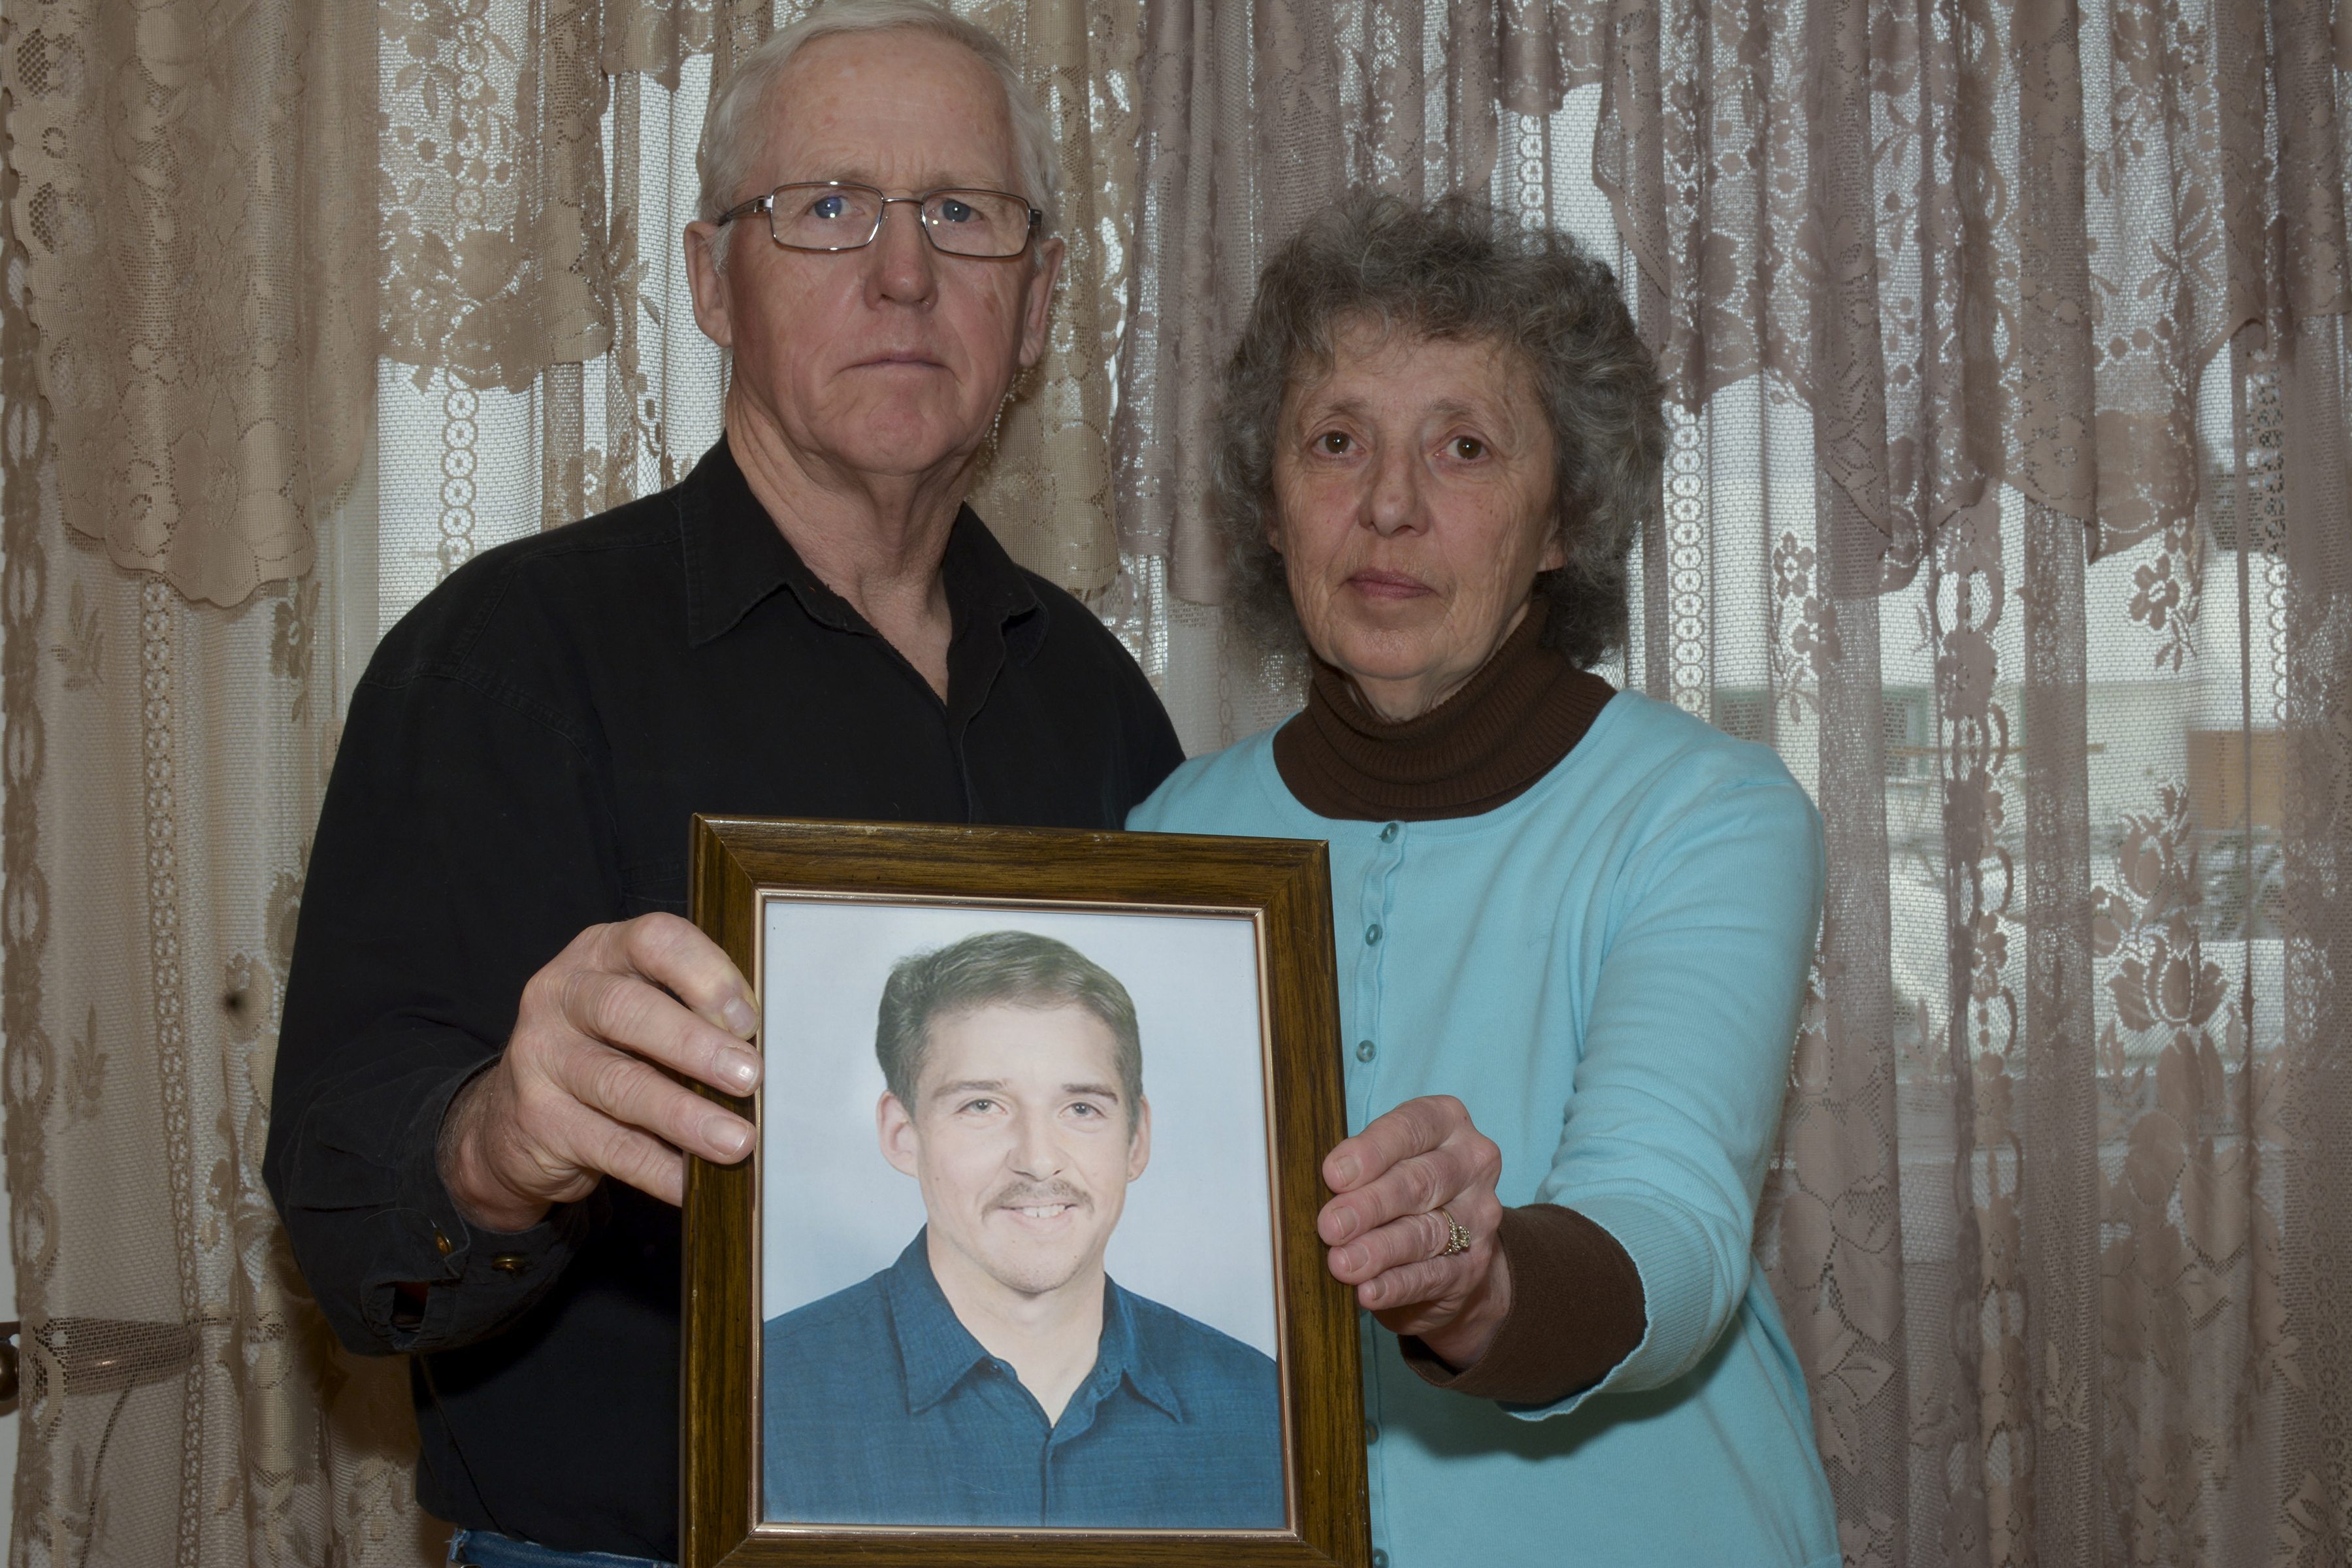 HOLDING ONTO HOPE - Trevor Angell was 28 at the time of his disappearance from Primm